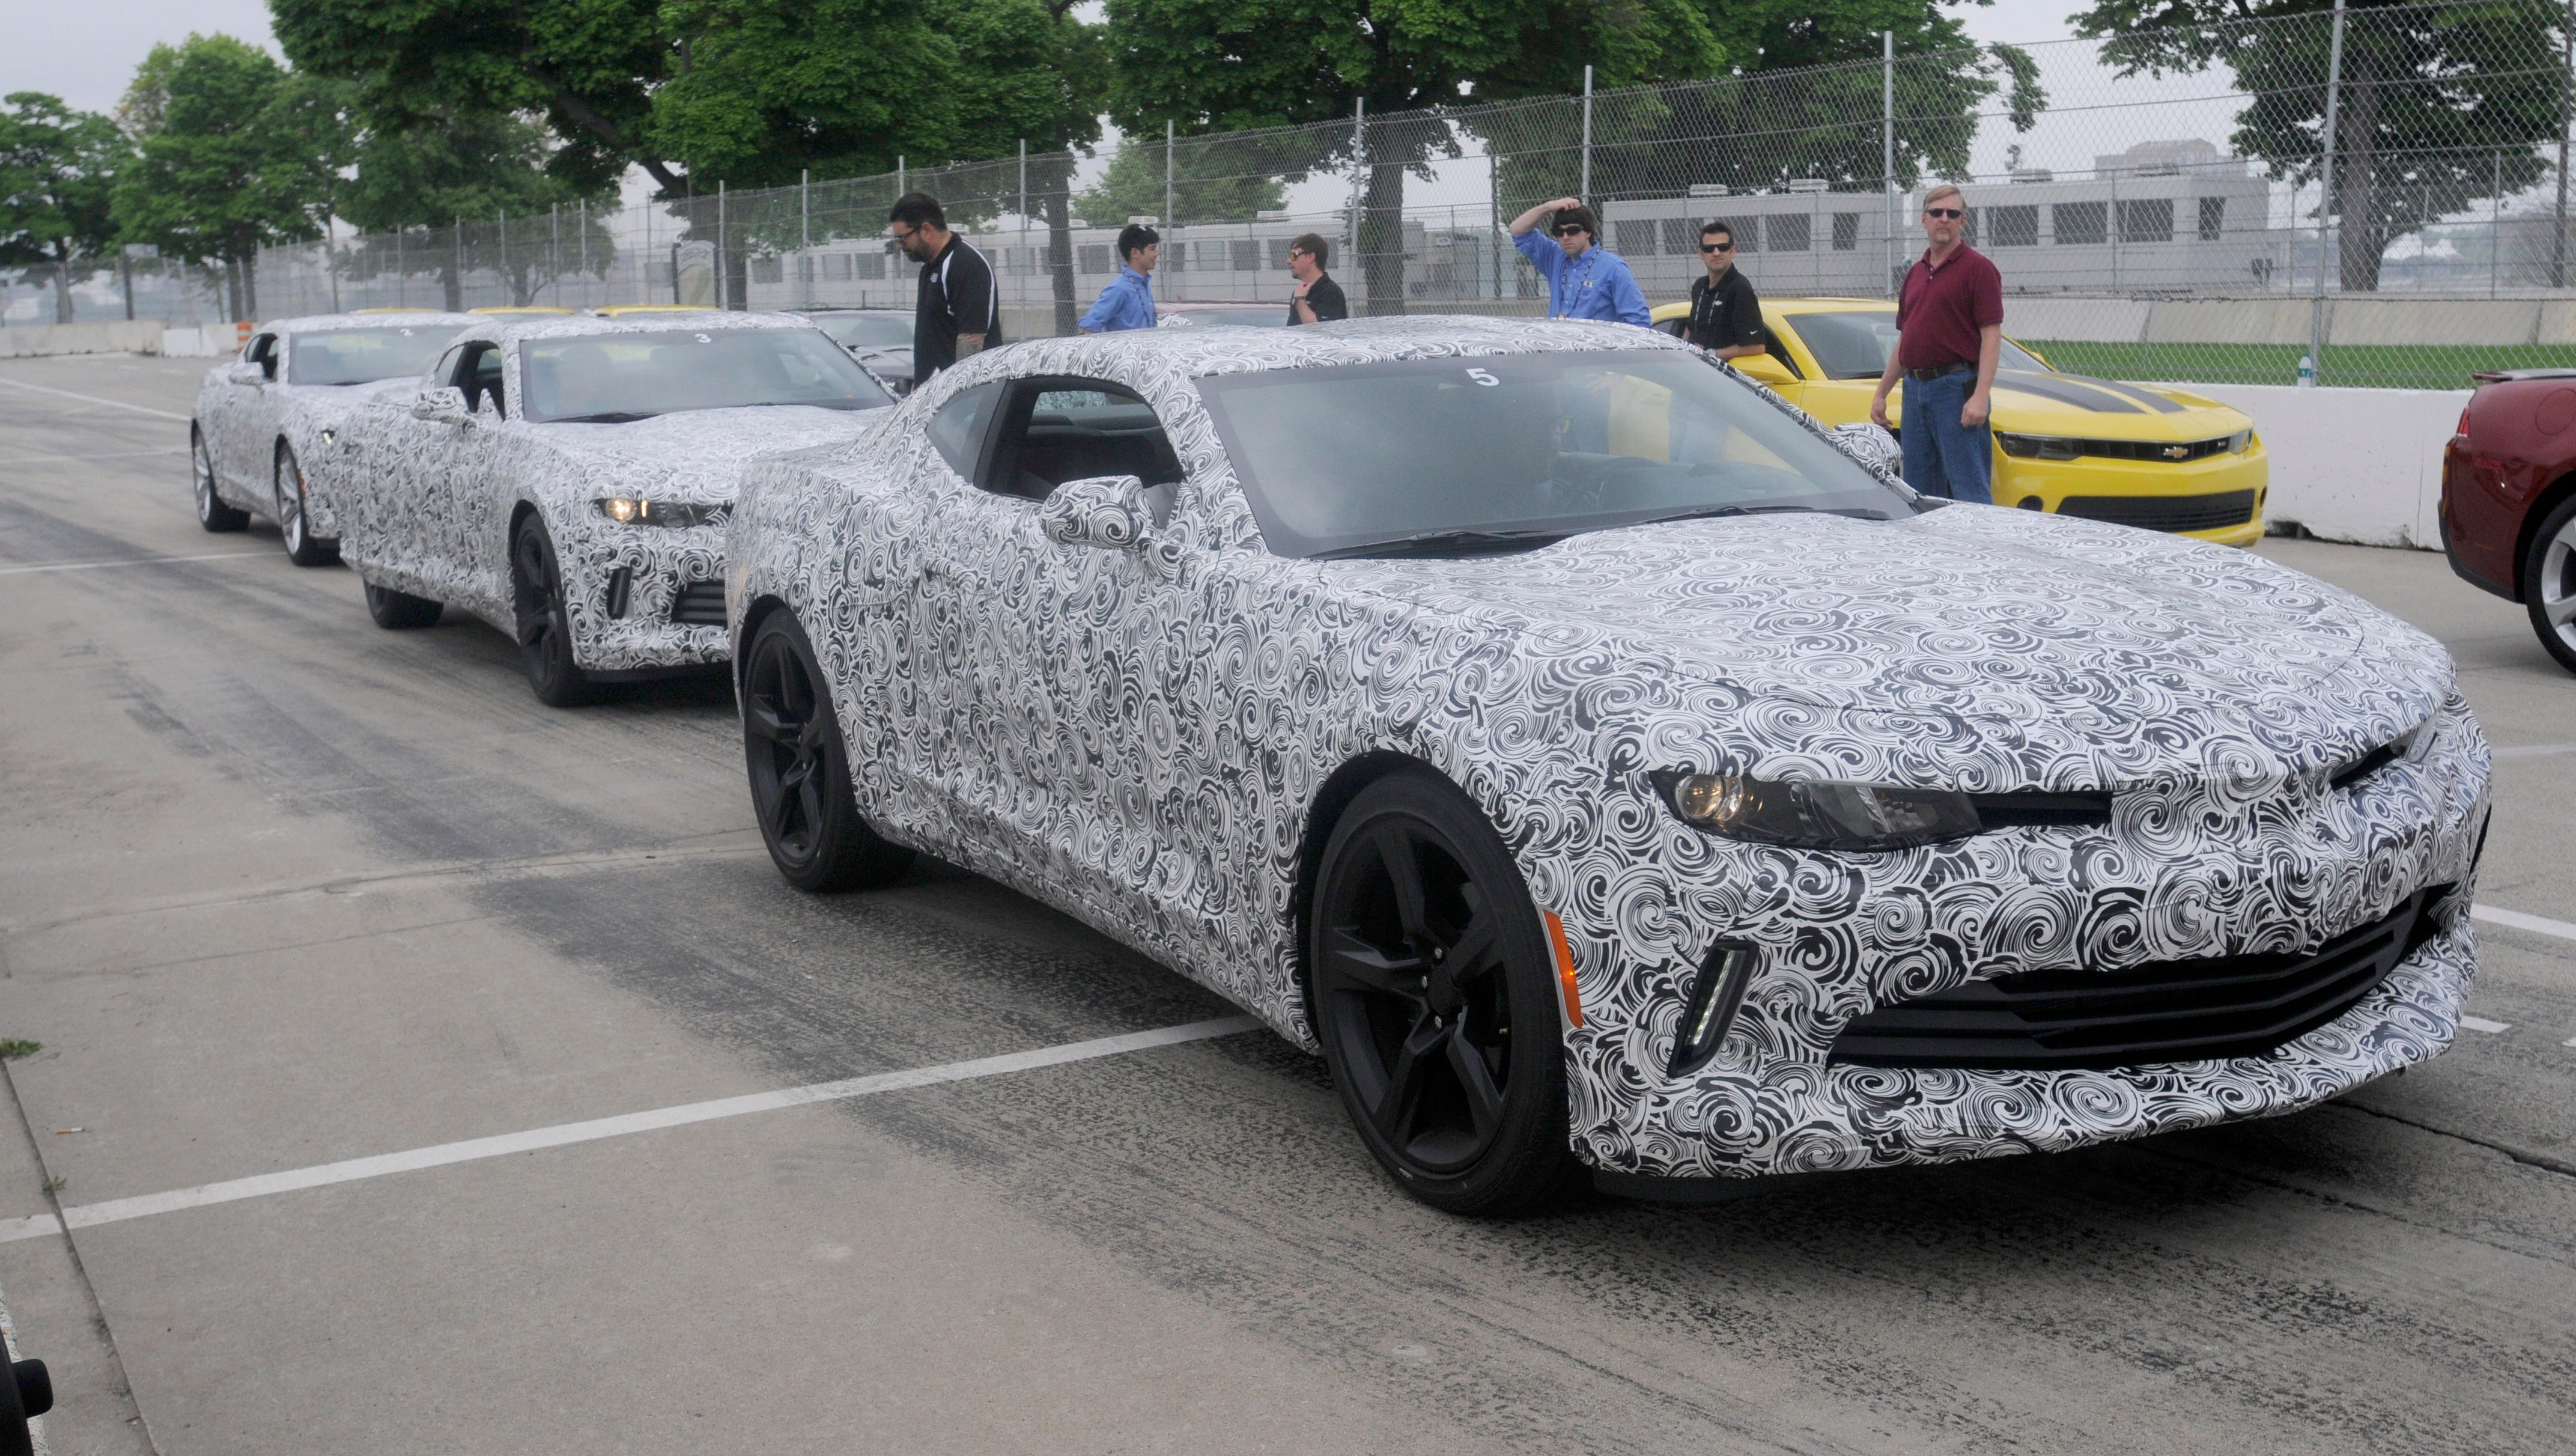 Several 2016 Camaro mule cars sit in pit lane during a test day with the new Chevrolet Camaro on the Grand Prix track at Belle Isle.